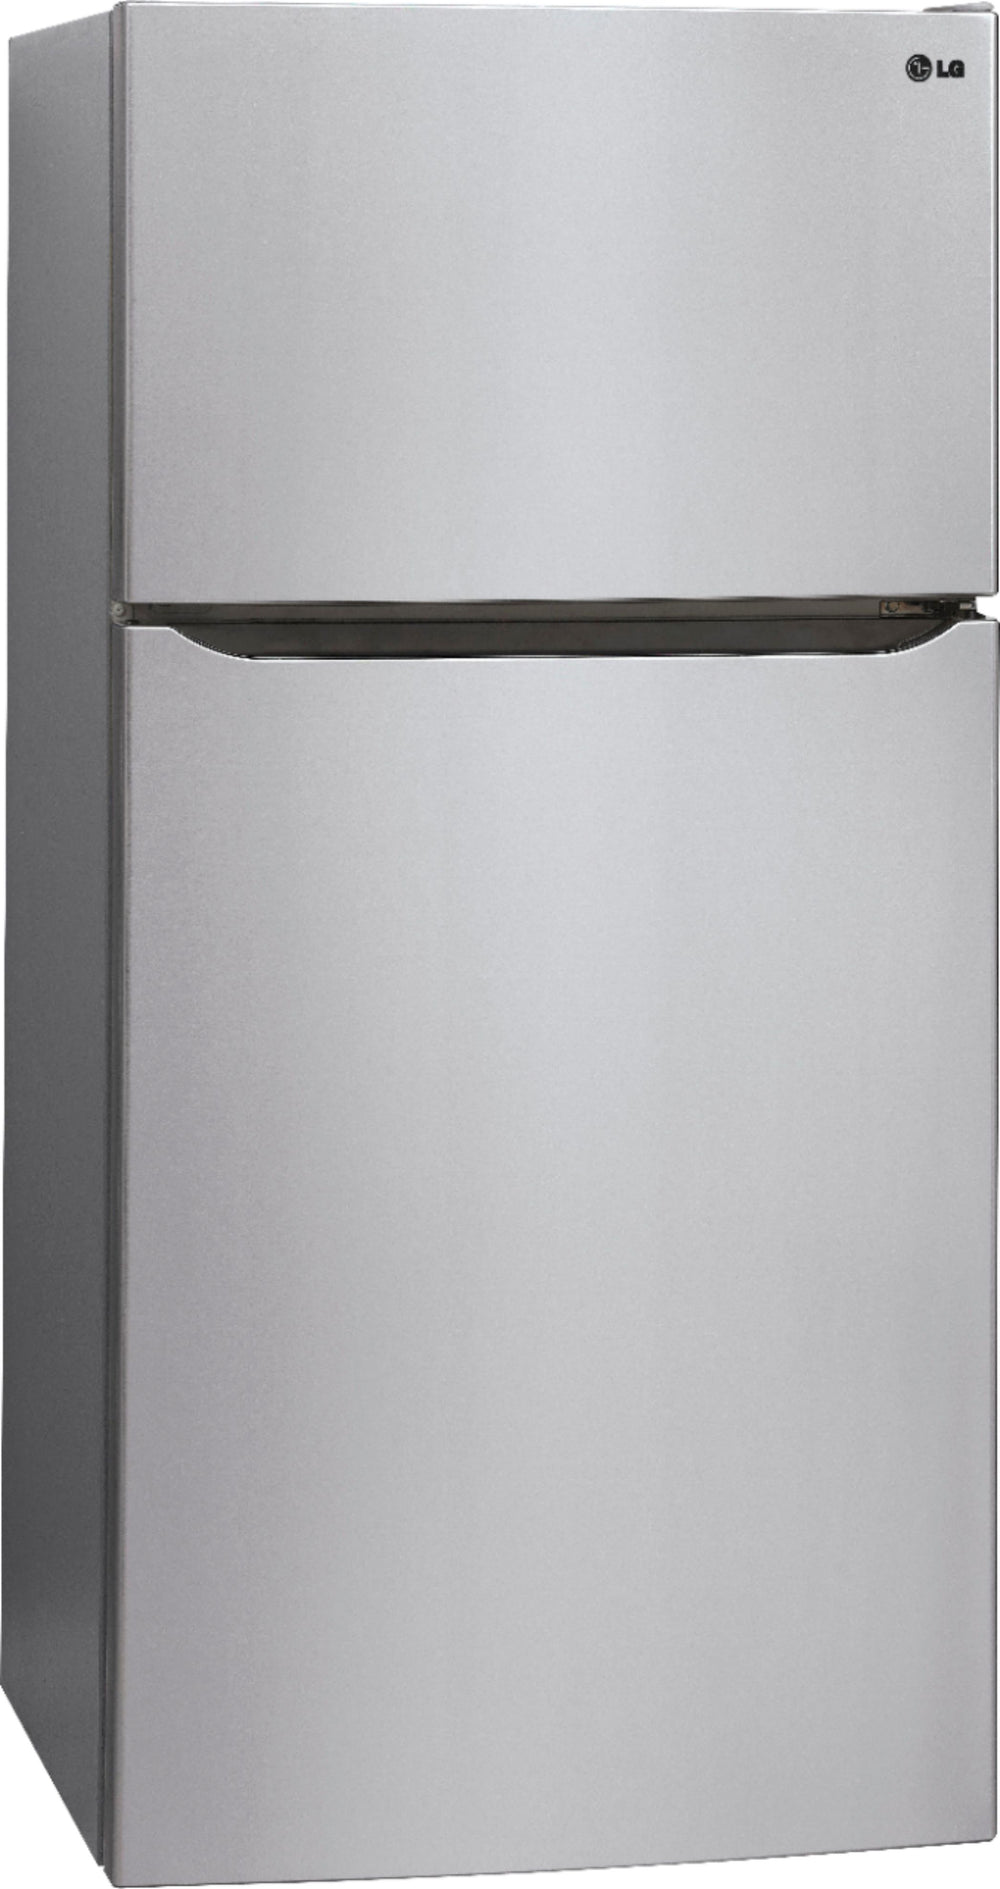 LG - 23.8 Cu. Ft. Top-Freezer Refrigerator with Ice Maker - Stainless Steel_1